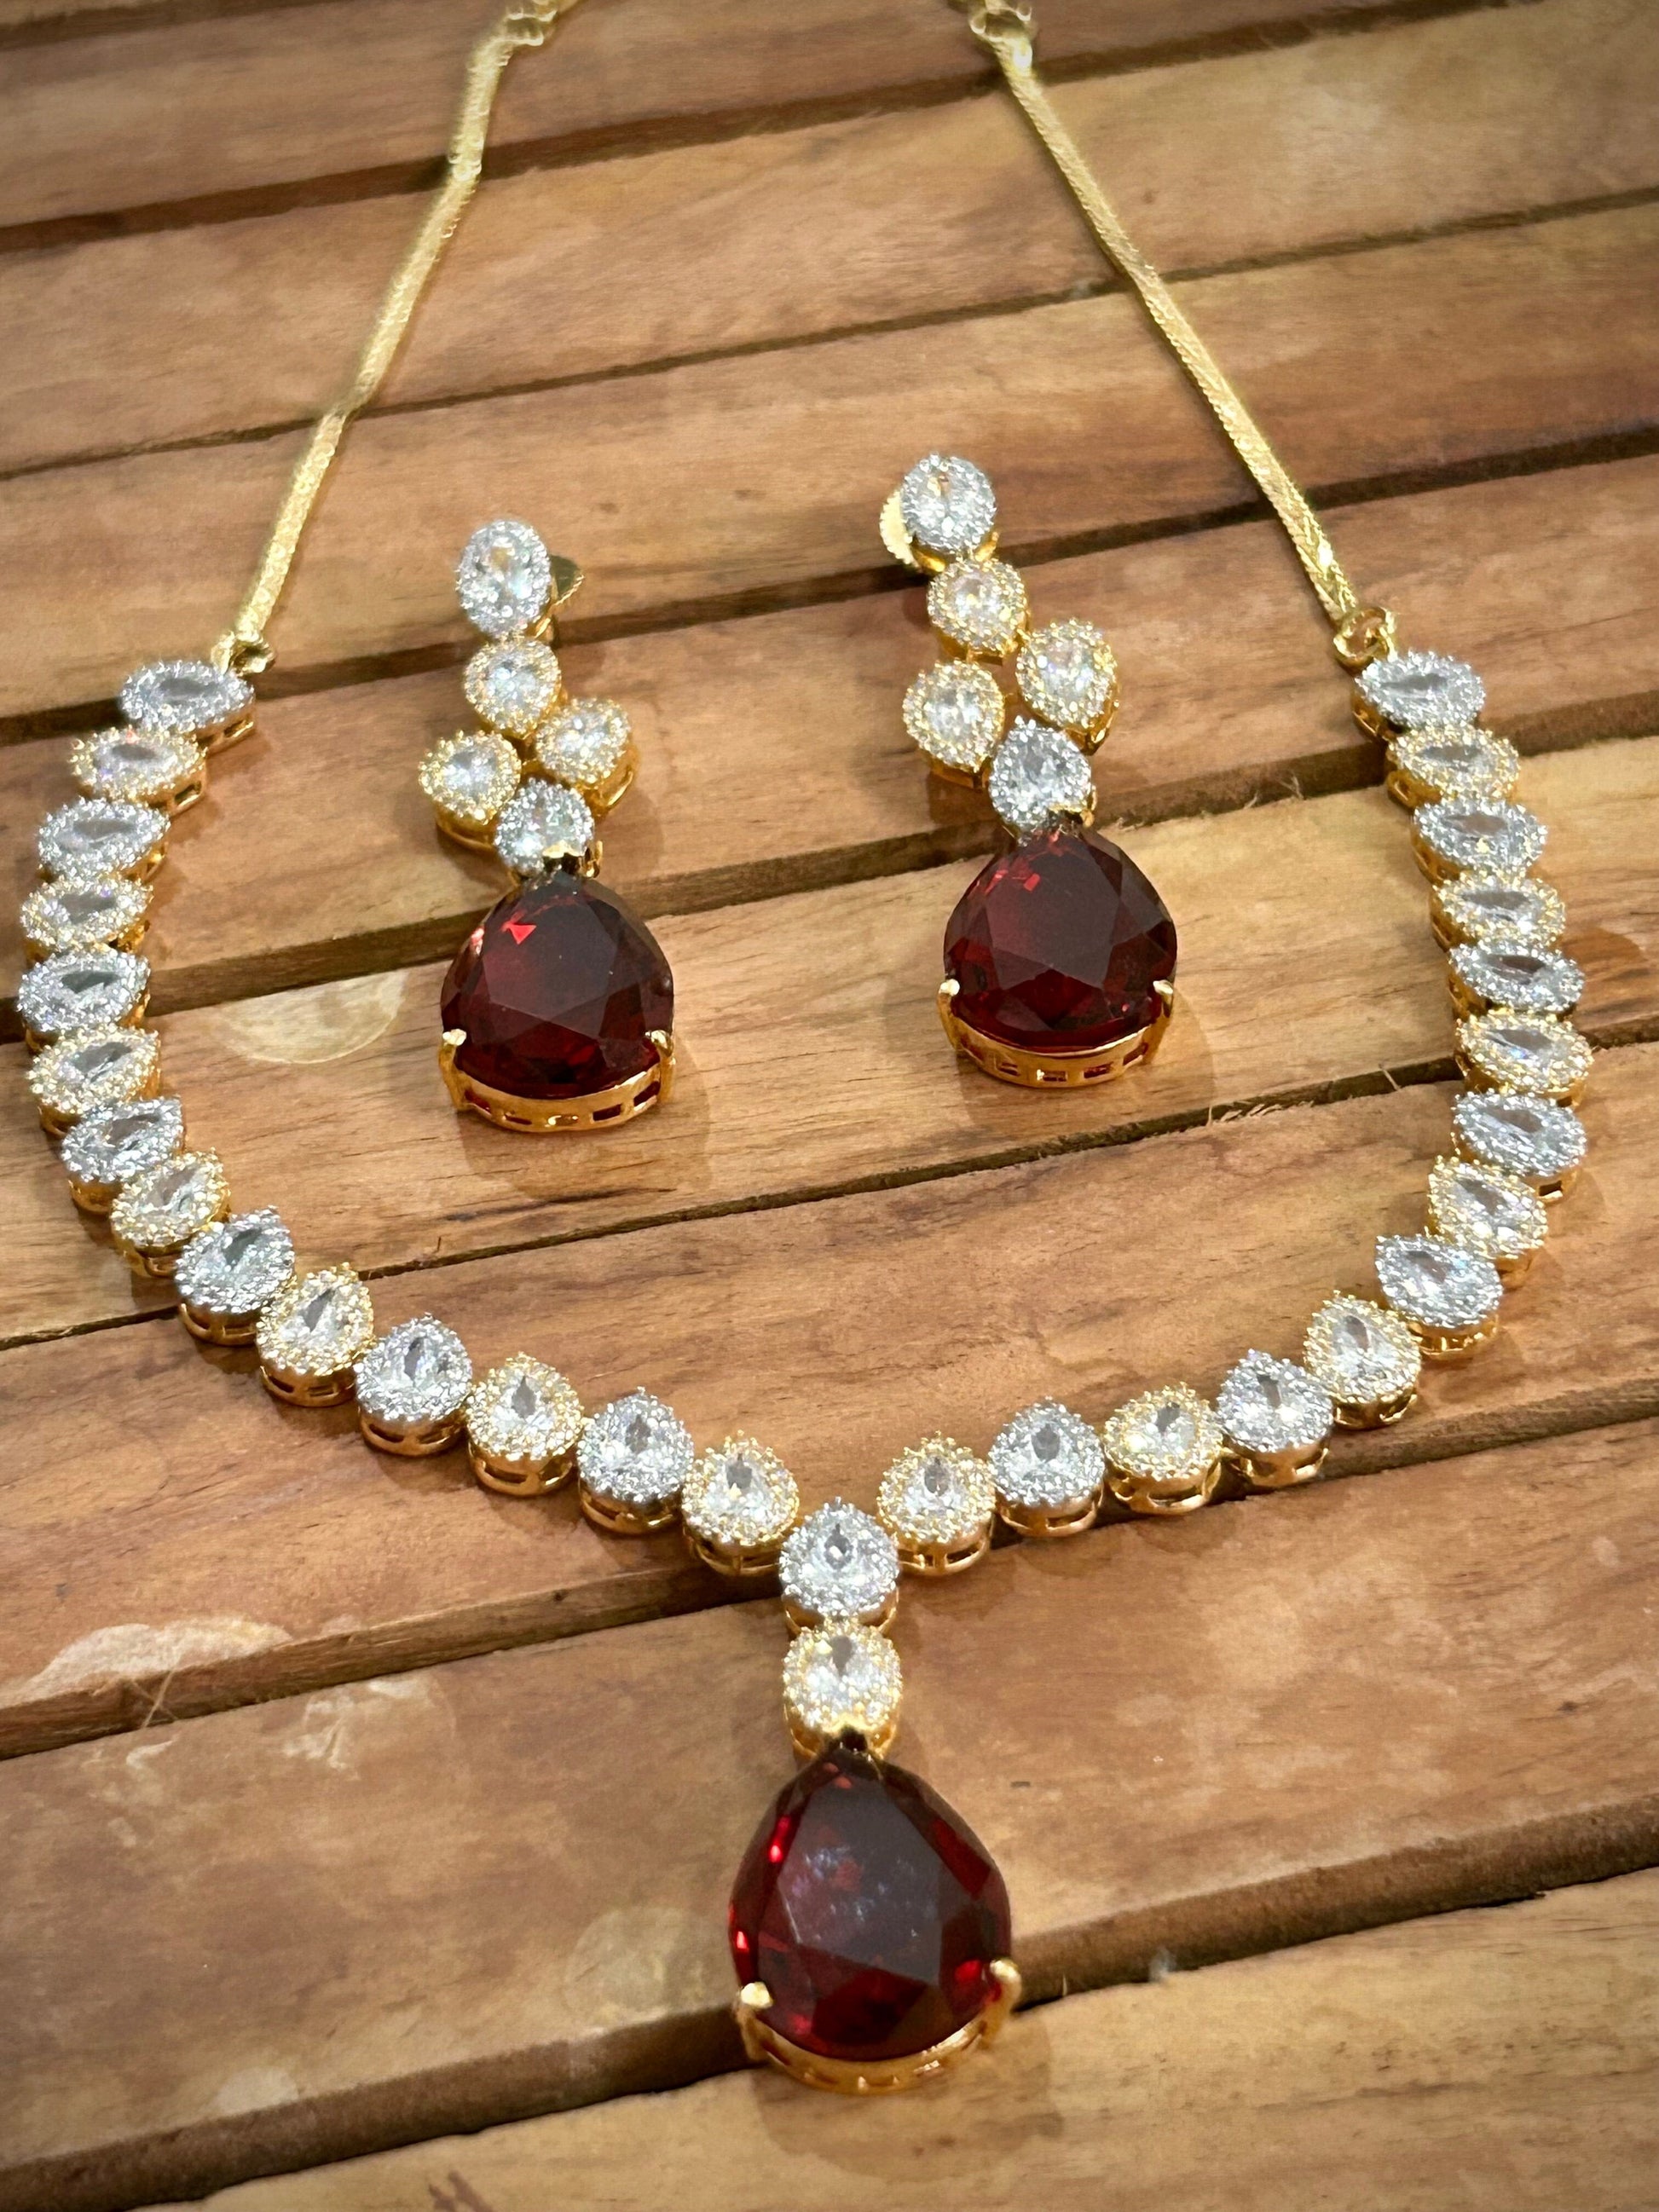  American Diamond necklace with pink stones and rose gold polish